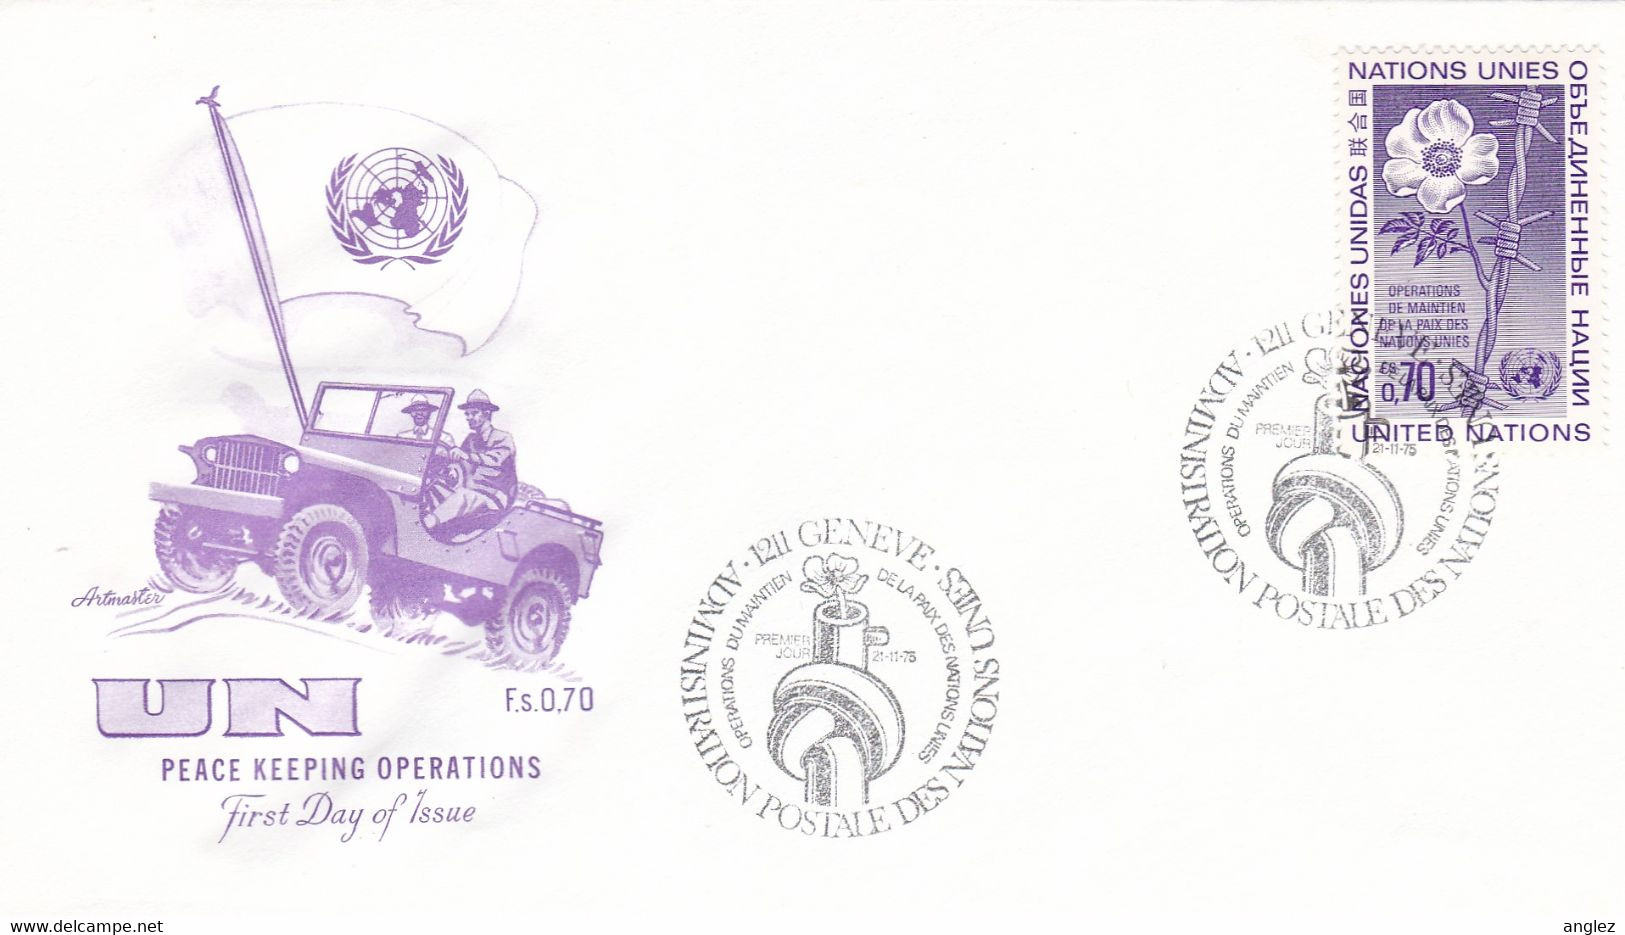 United Nations - Geneva Office 1975 Peace Keeping Operations Illustrated FDC - Covers & Documents